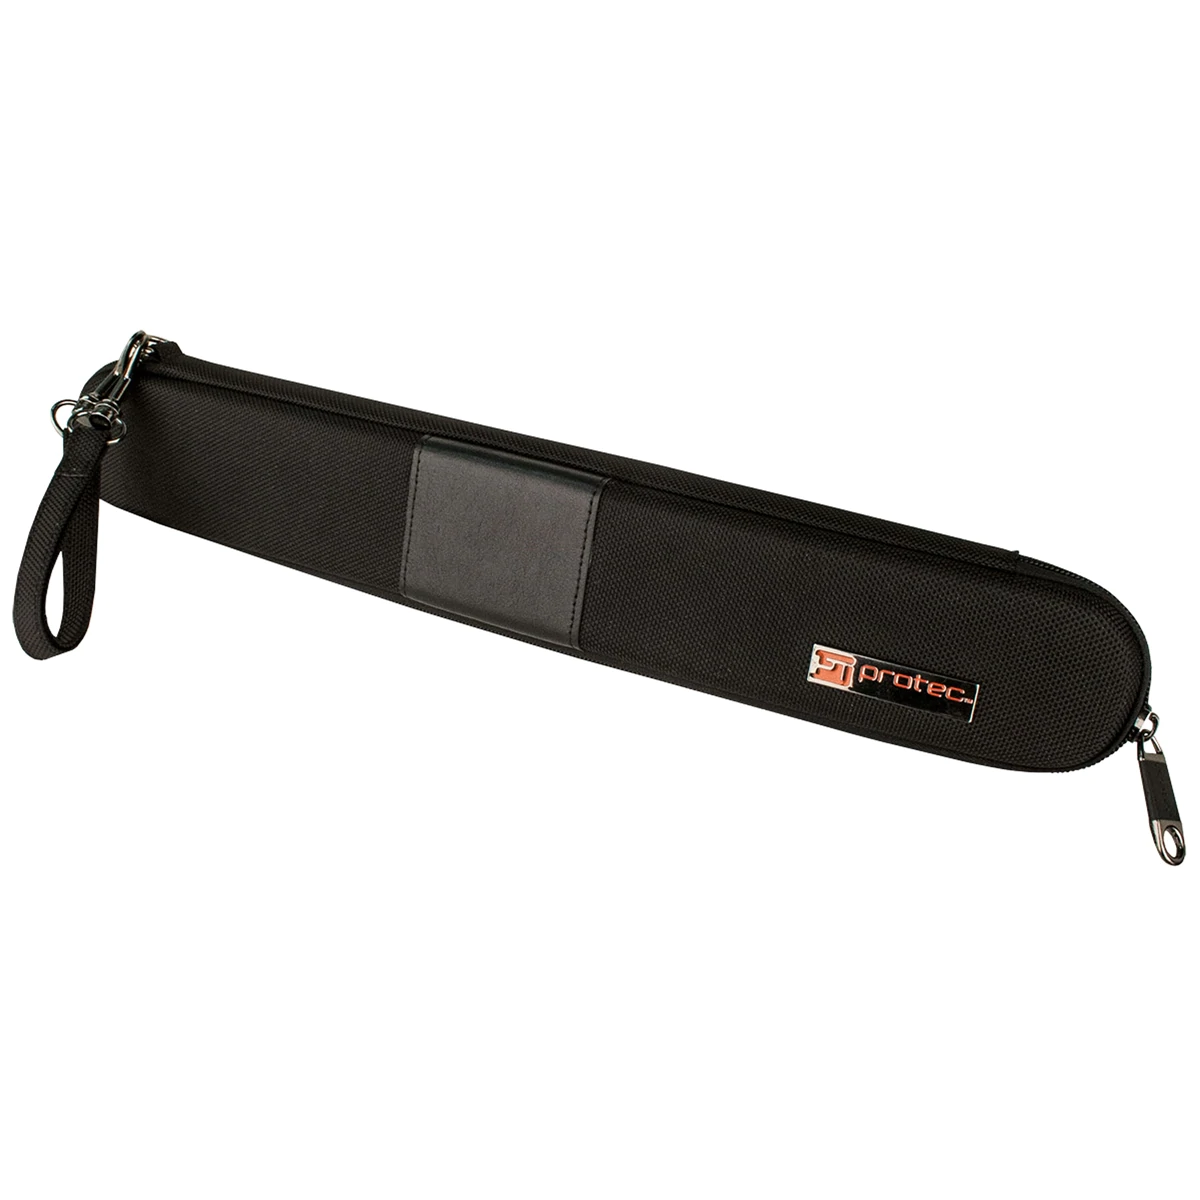 PROTEC Modular Double Baton Case - Fits up to 16"